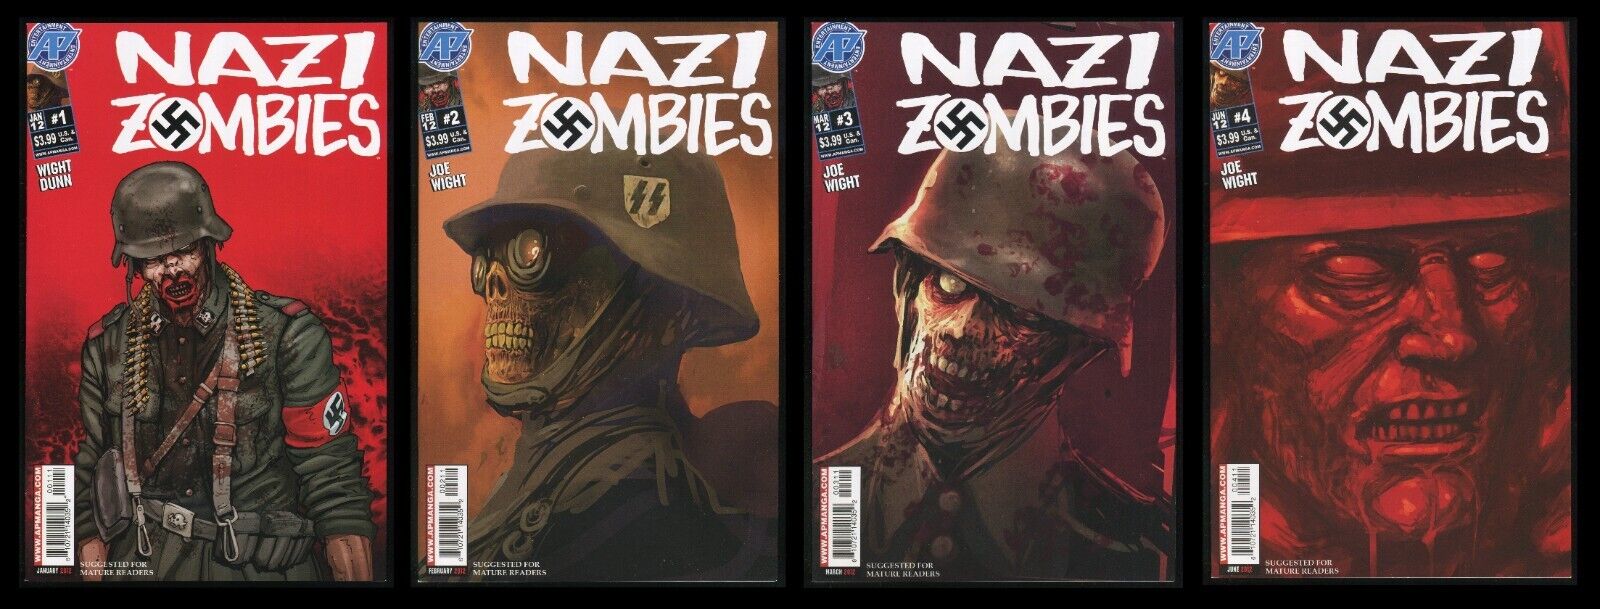 Nazi Zombies Comic Set 1-2-3-4 Lot Horror Third Reich SS WW2 Call of Duty Undead